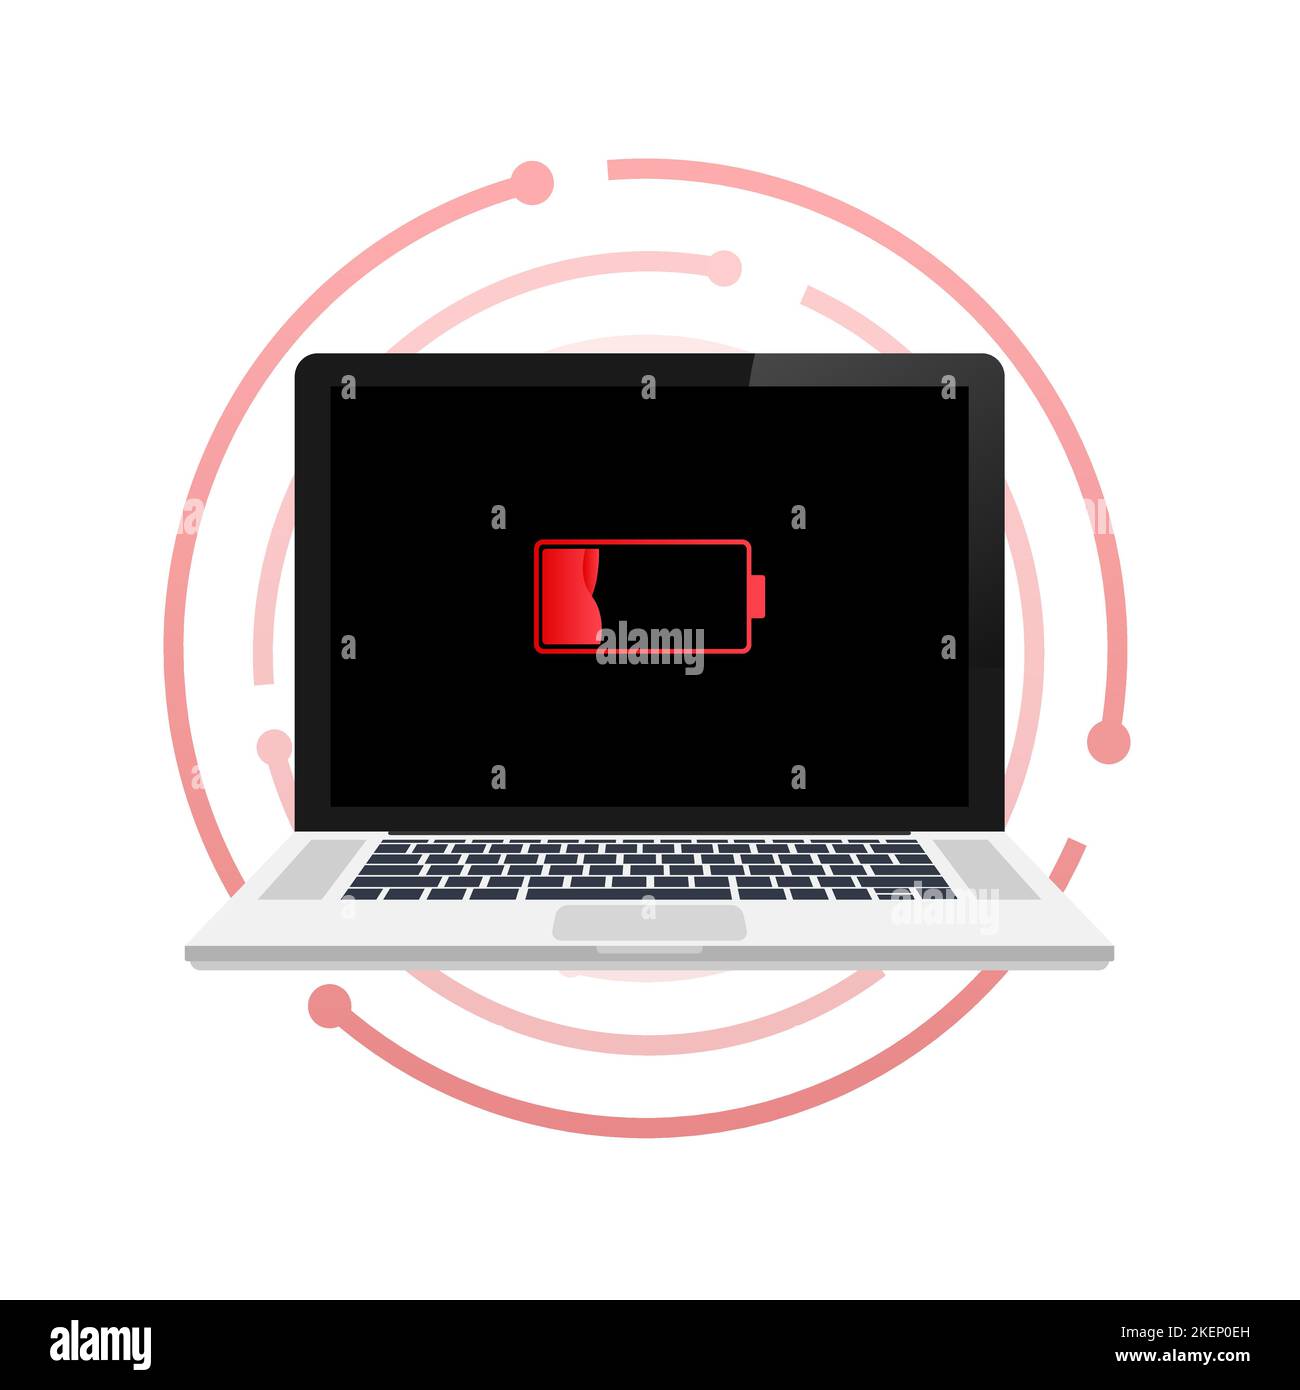 Laptop with low battery icon on screen. Vector stock illustration. Stock Vector